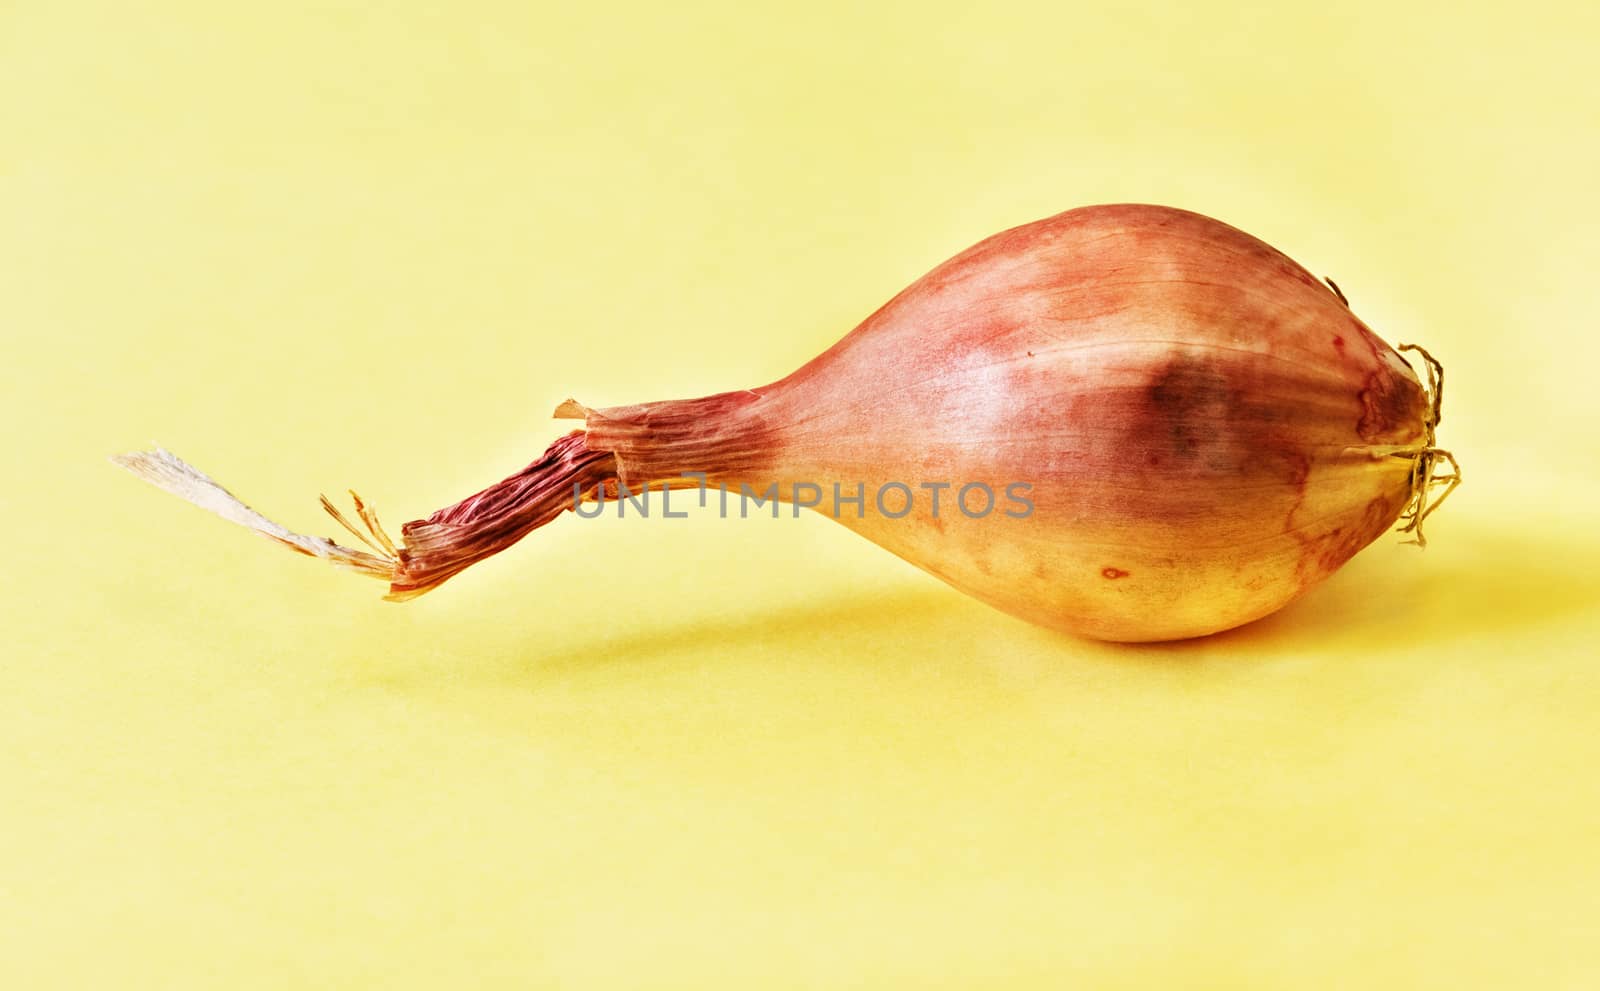 One  unpeeled bulb of shallot  on a yellow background ,a small bulb copper color ,vibrant colors , studio shot ,front view ,